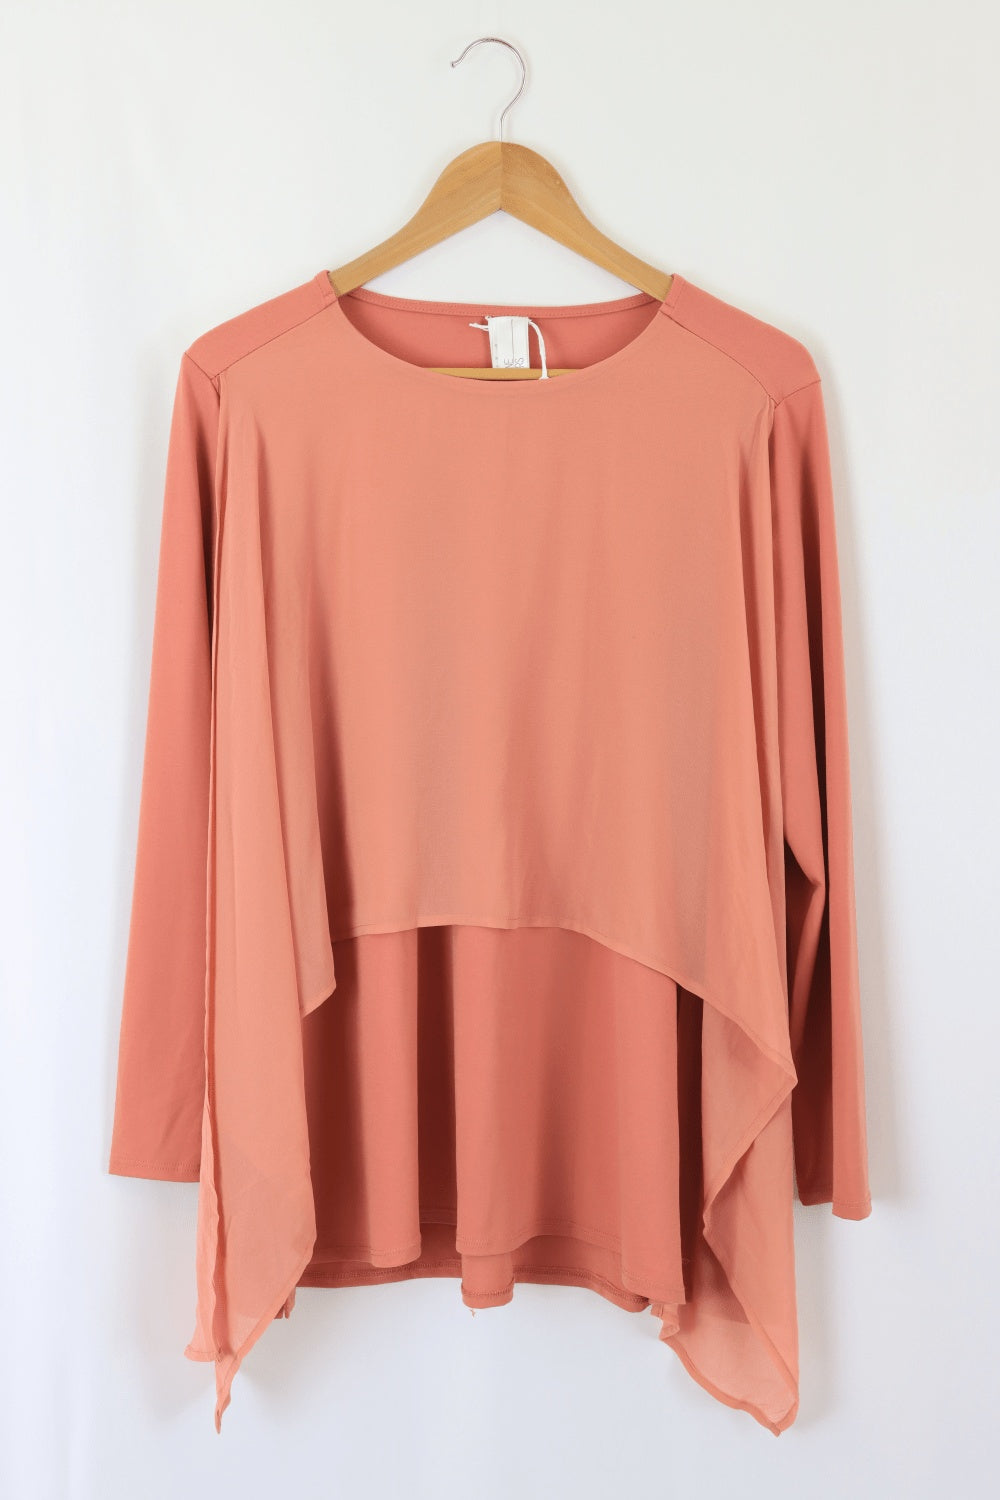 Wynne Layers Pink Top M